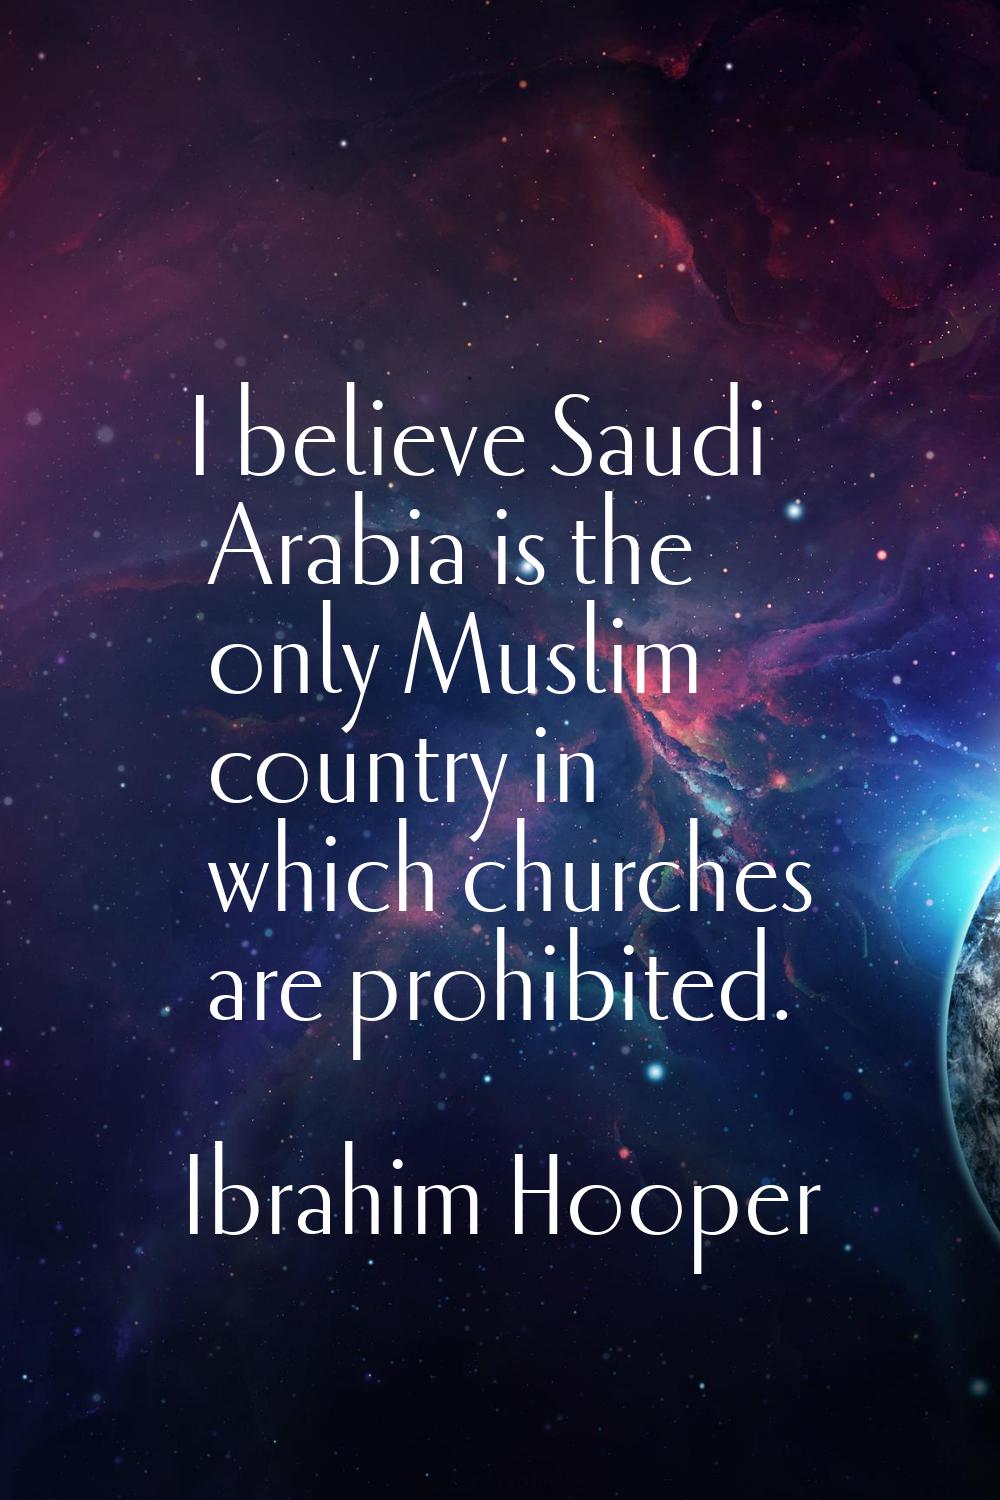 I believe Saudi Arabia is the only Muslim country in which churches are prohibited.